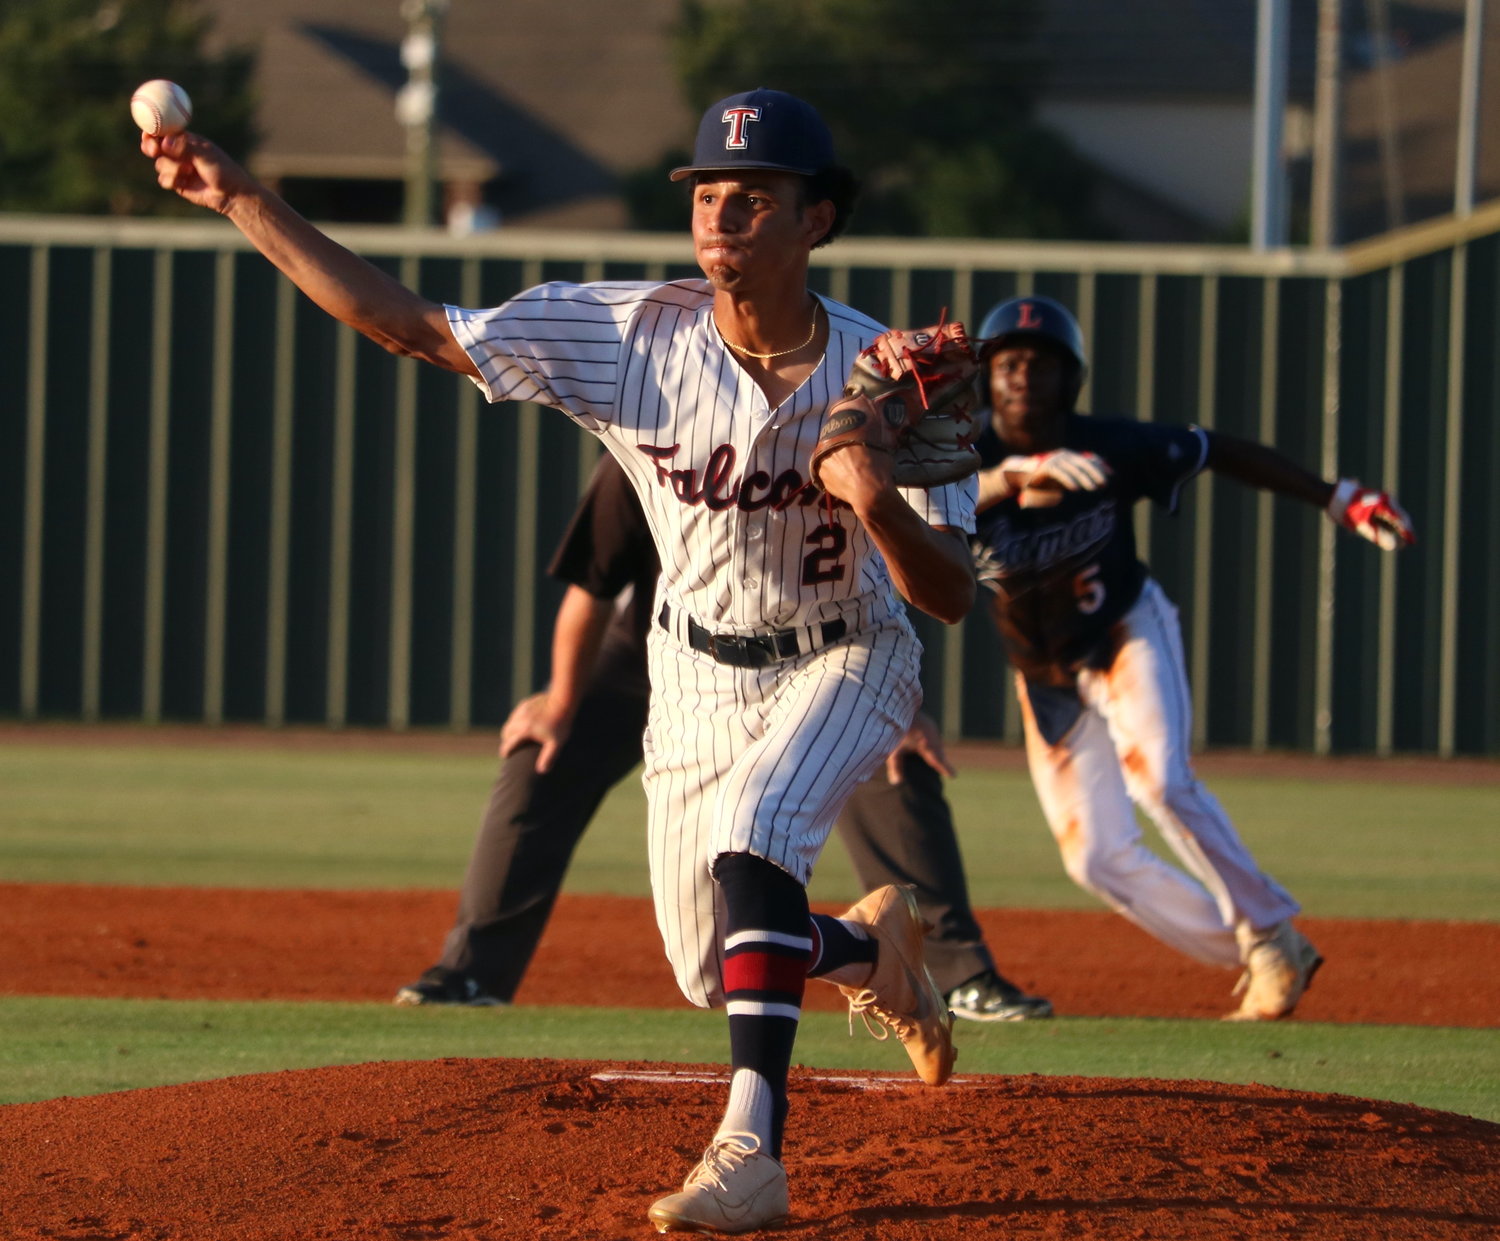 Trevor Esparza pitches during Thursday’s Class 6A area round game between Tompkins and Lamar at the Tompkins baseball field.